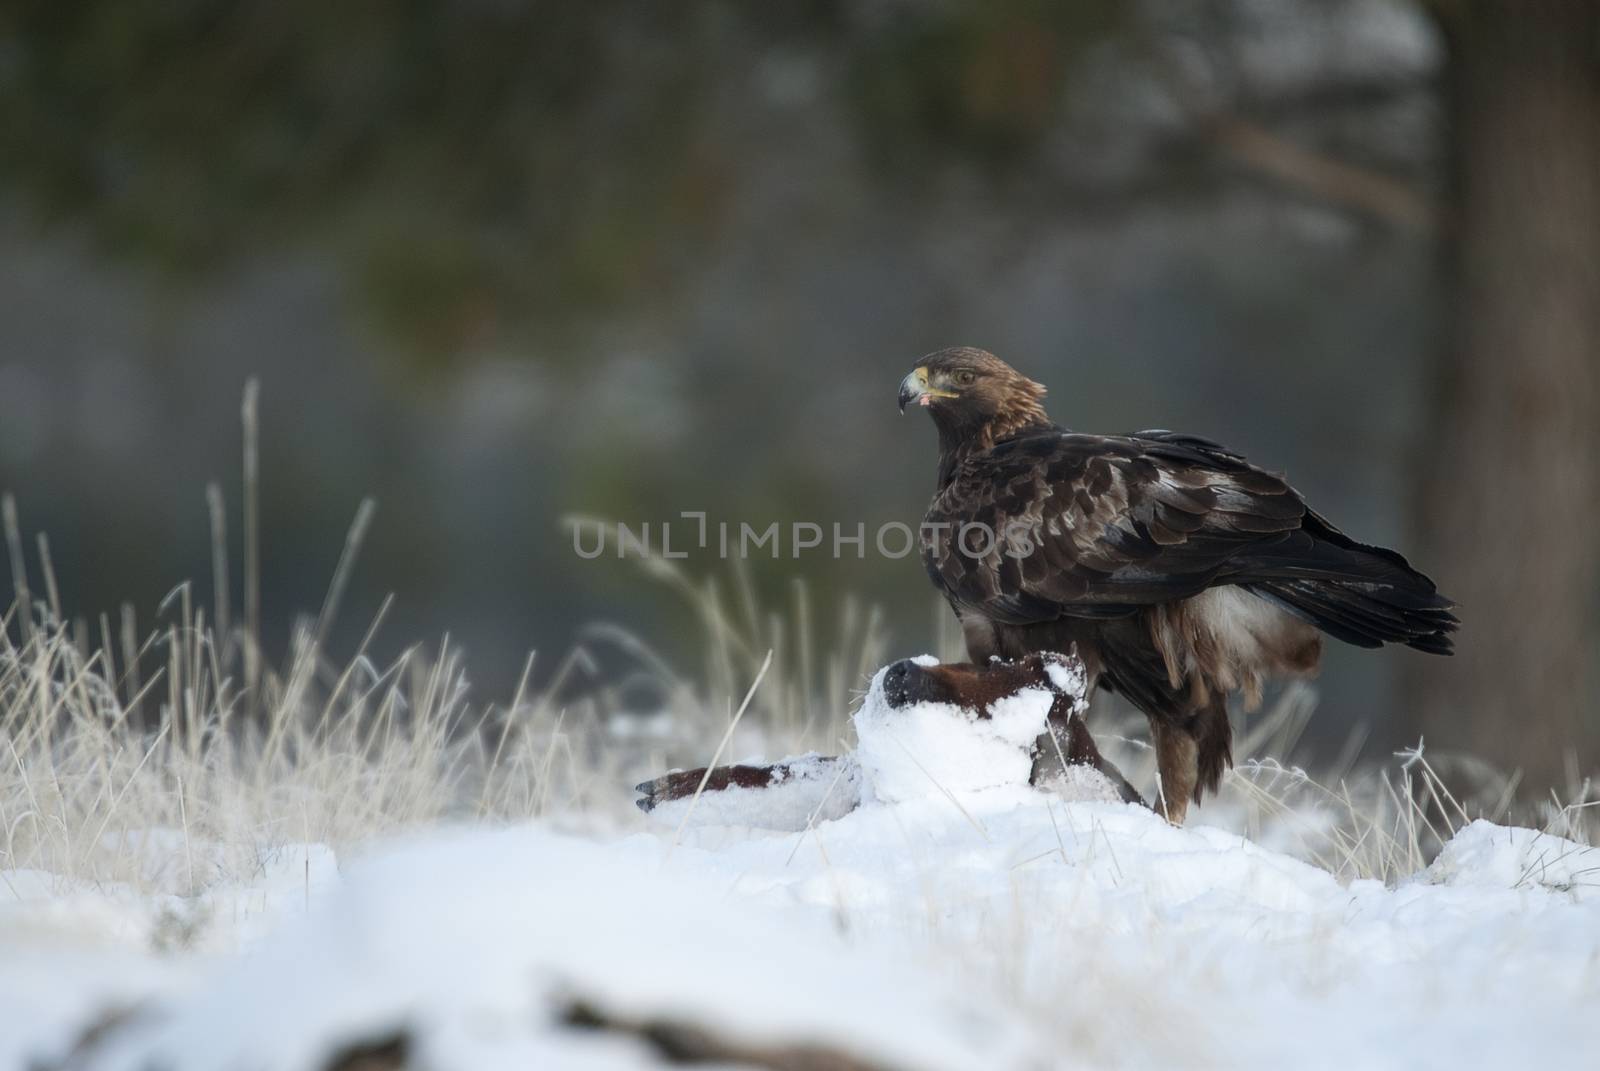 golden eagle (Aquila chrysaetos), in the snow eating carola from a small